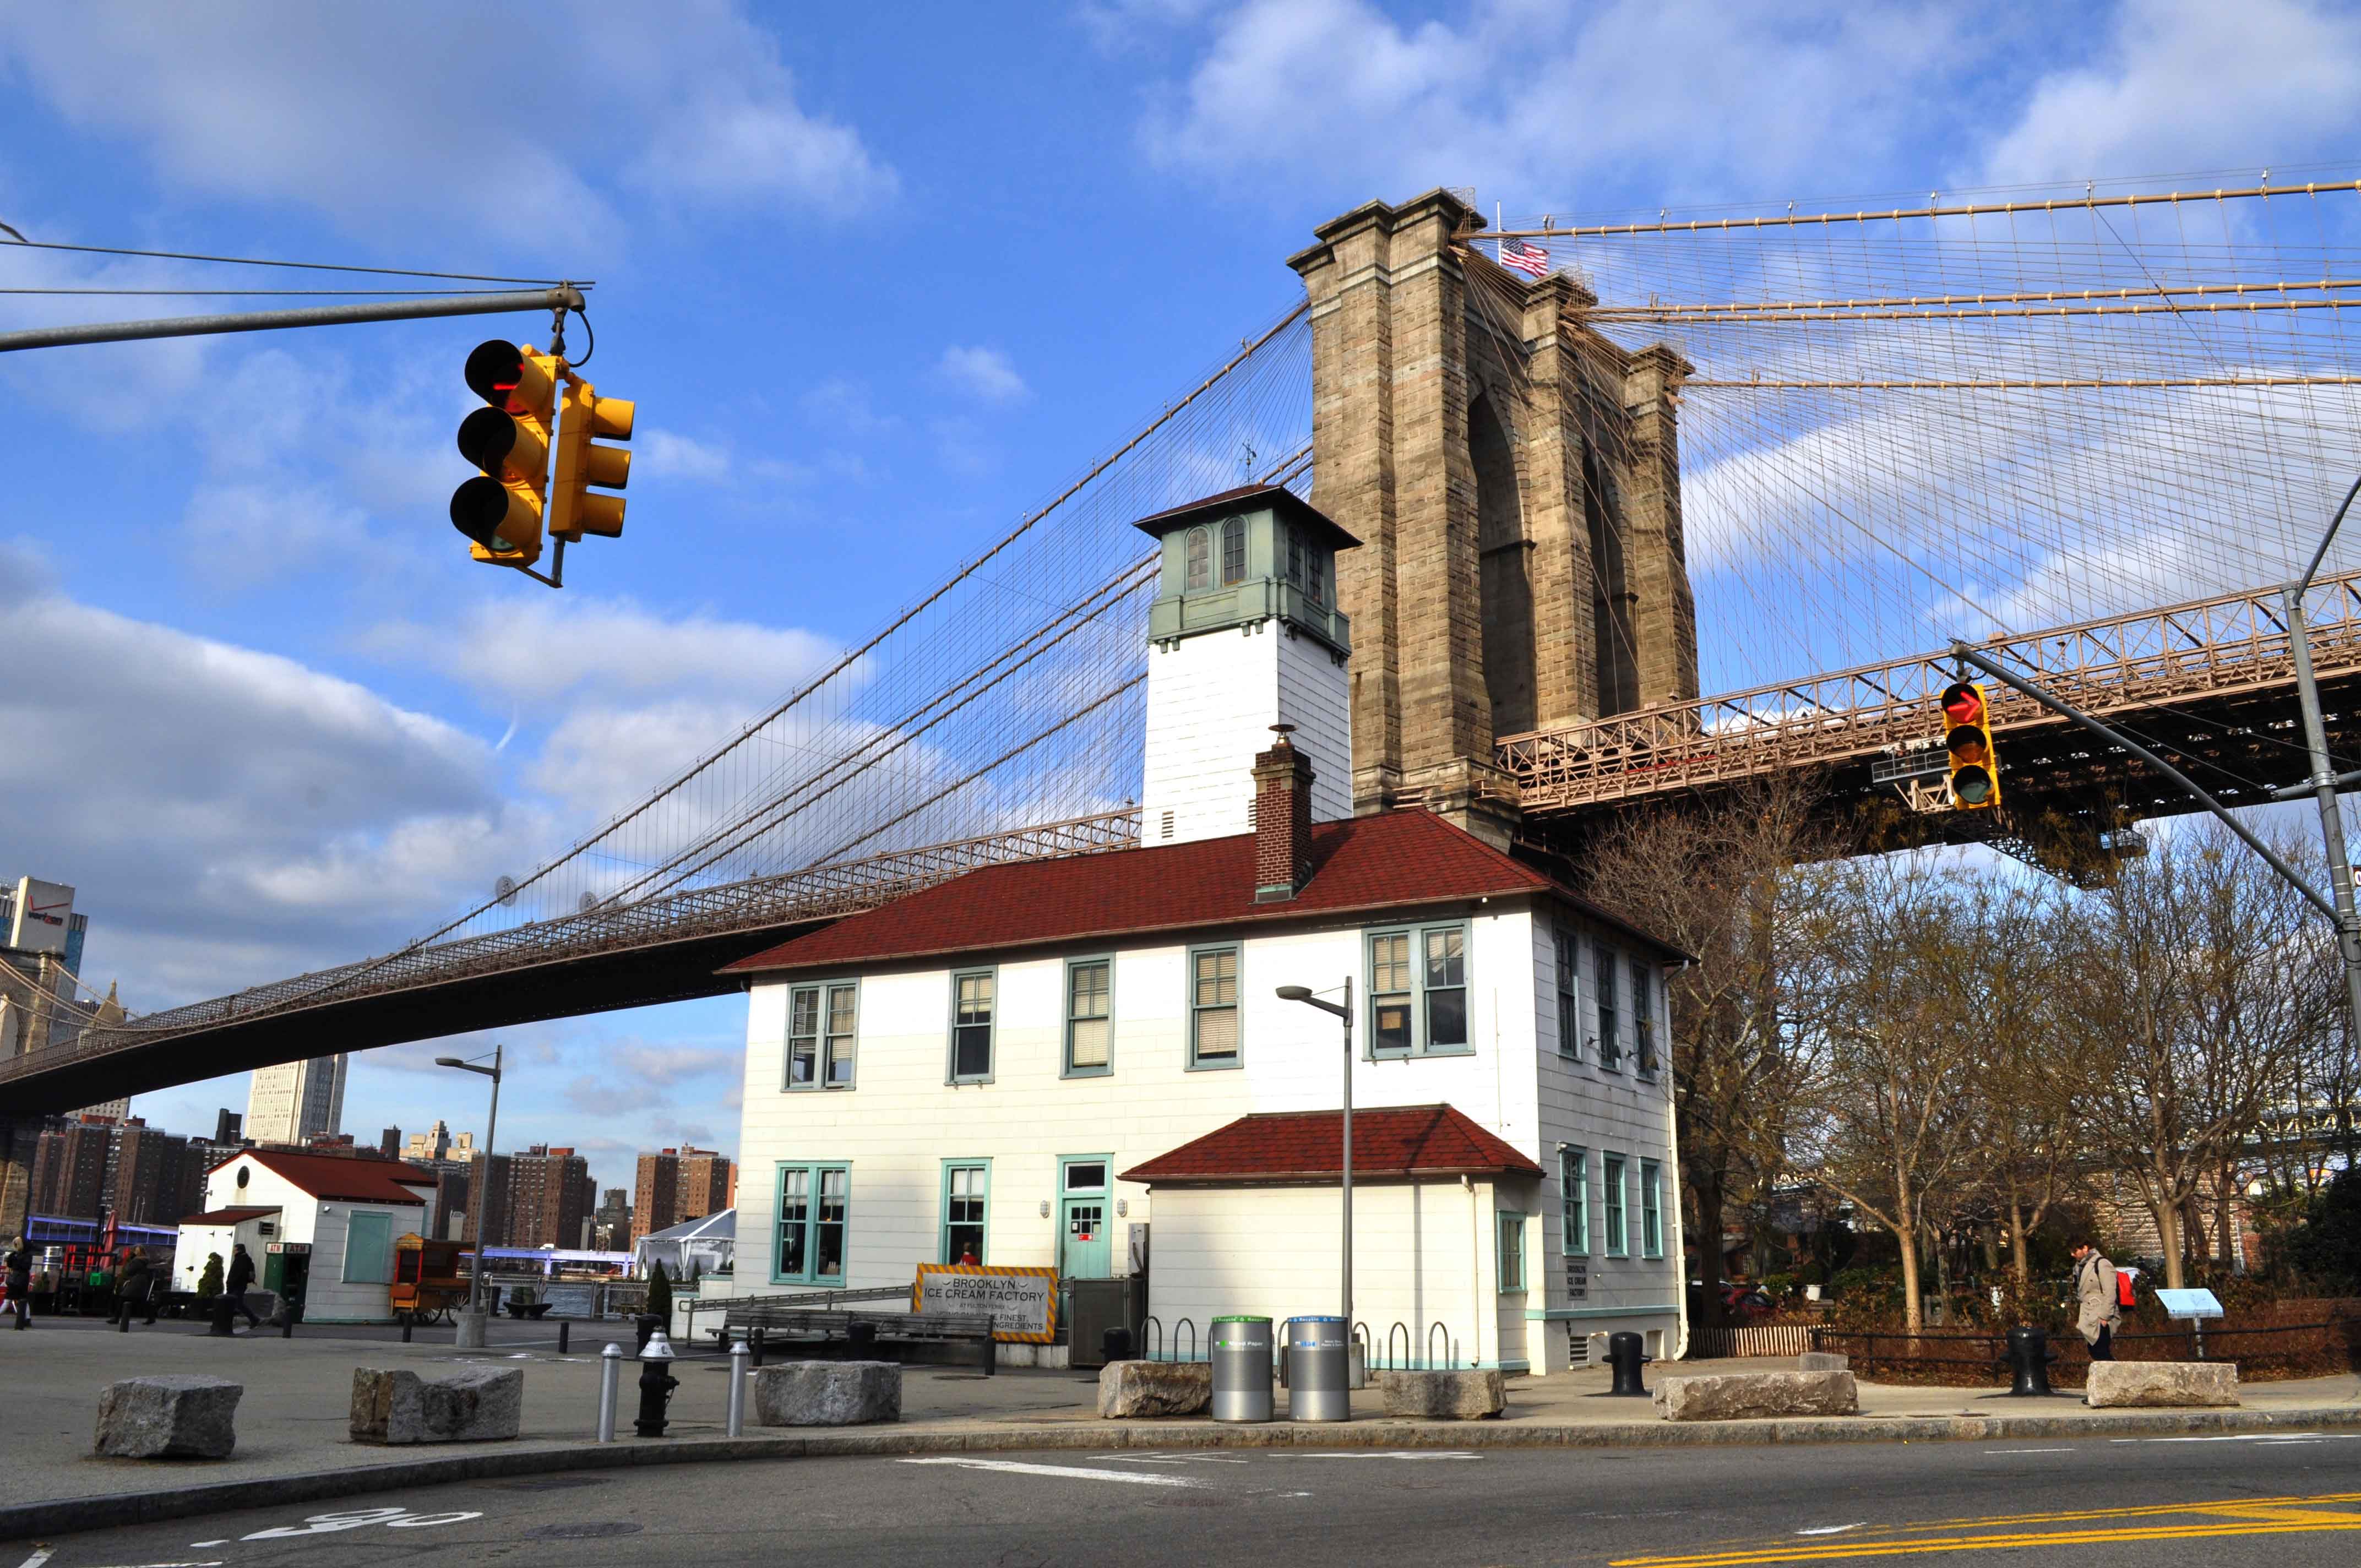 2 Pierrepont Street in Brooklyn Heights offers a convenient location near many favorite Brooklyn landmarks and attractions, like the iconic Brooklyn Bridge, shown here